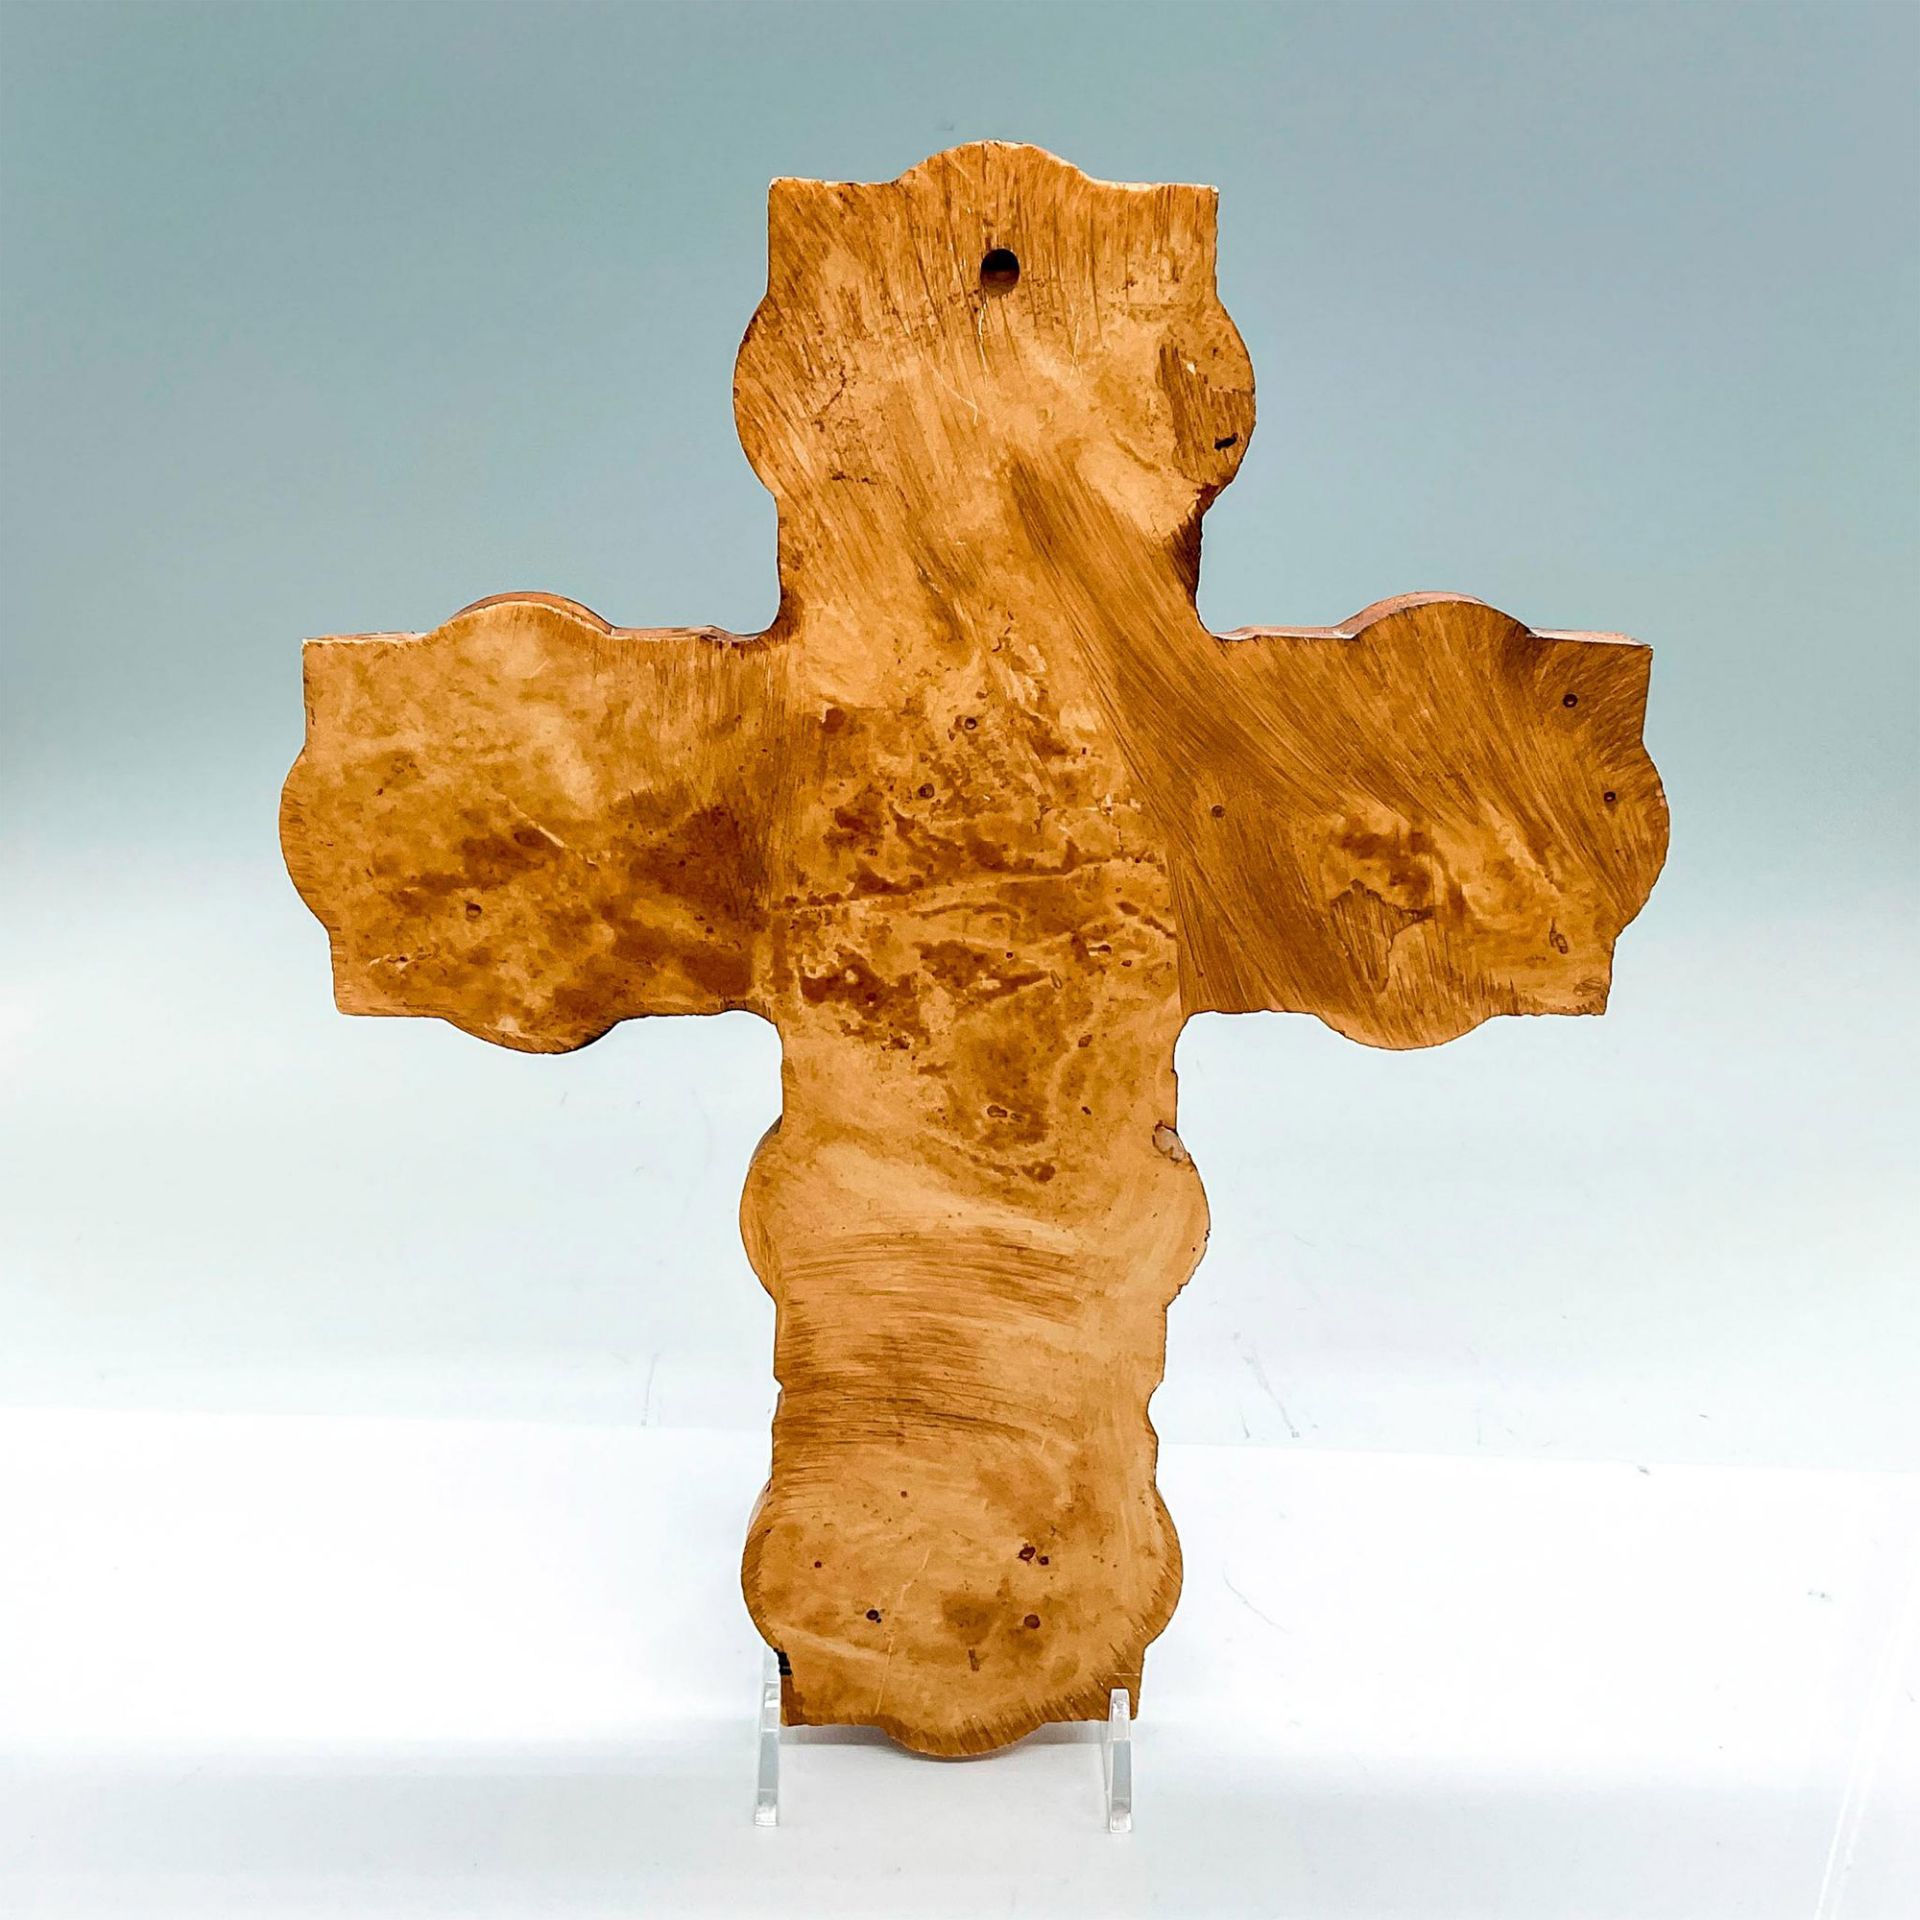 2pc Christian Crosses, The Life of Jesus - Image 3 of 5